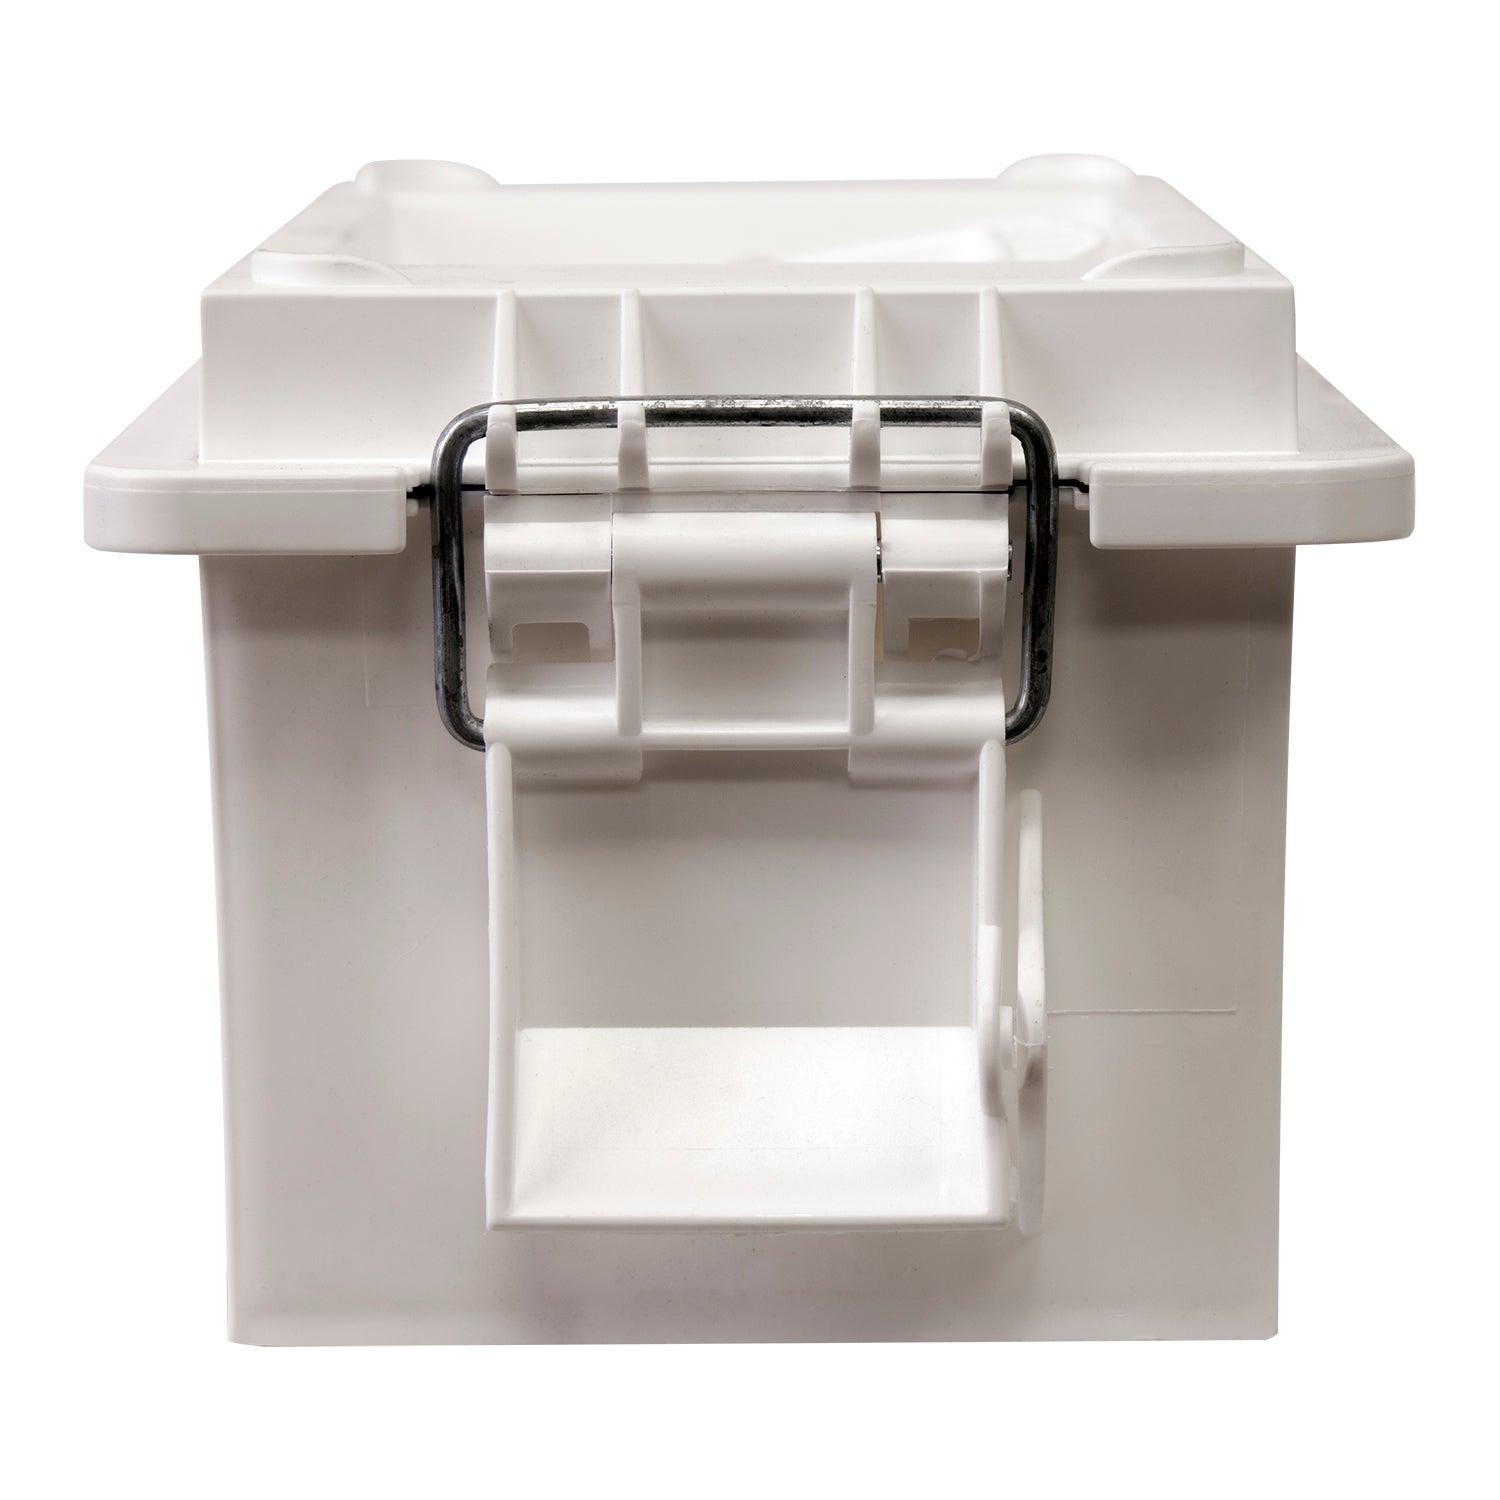 Wise 56011-40 Small Utility Dry Box, White